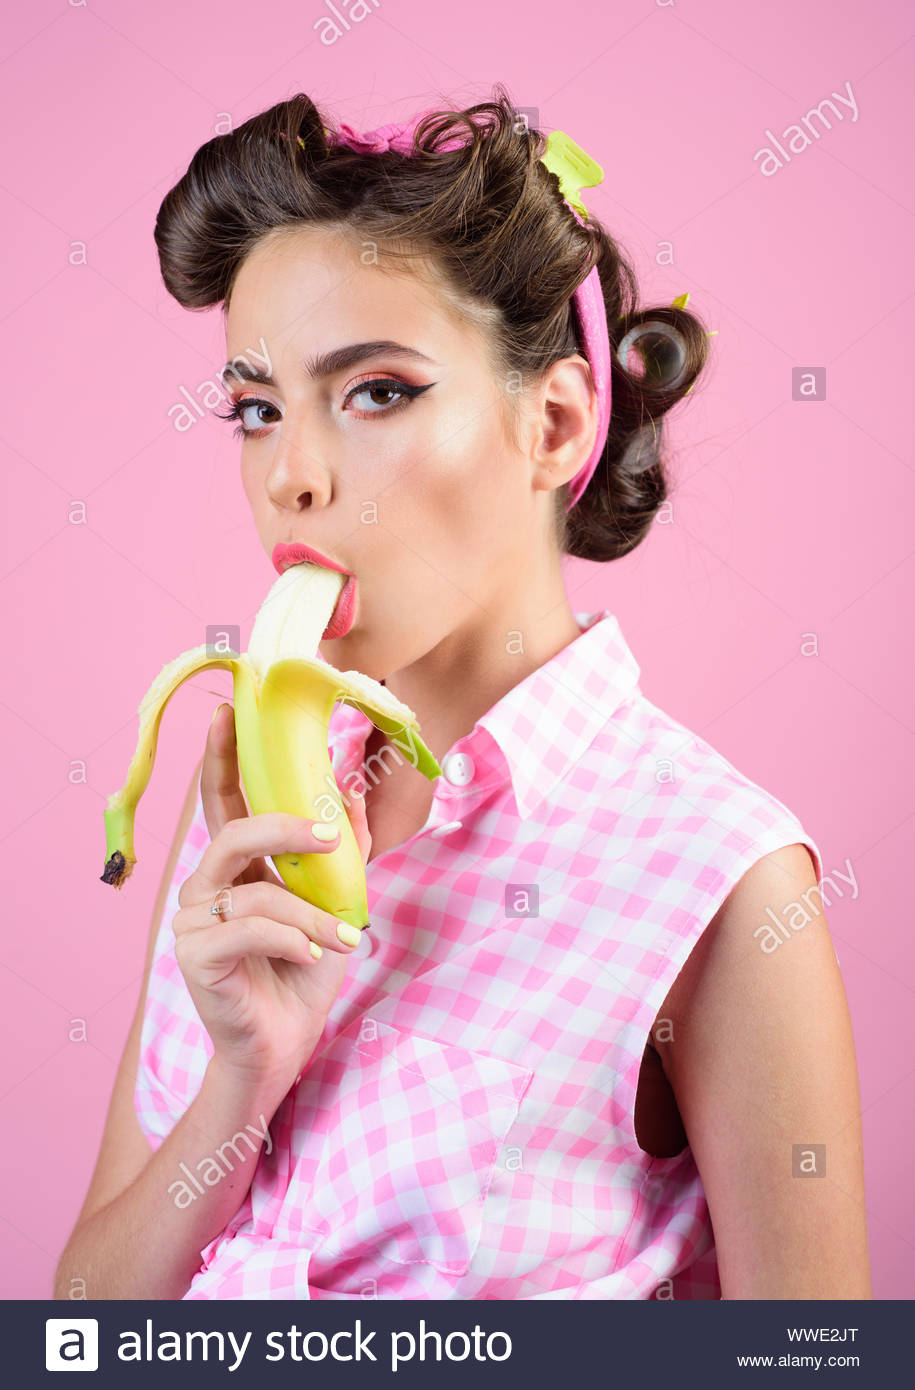 pretty-girl-in-vintage-style-pin-up-woman-with-trendy-makeup-pinup-girl-with-fashion-hair-banana-dieting-retro-woman-eating-banana-only-fresh-and-WWE2JT